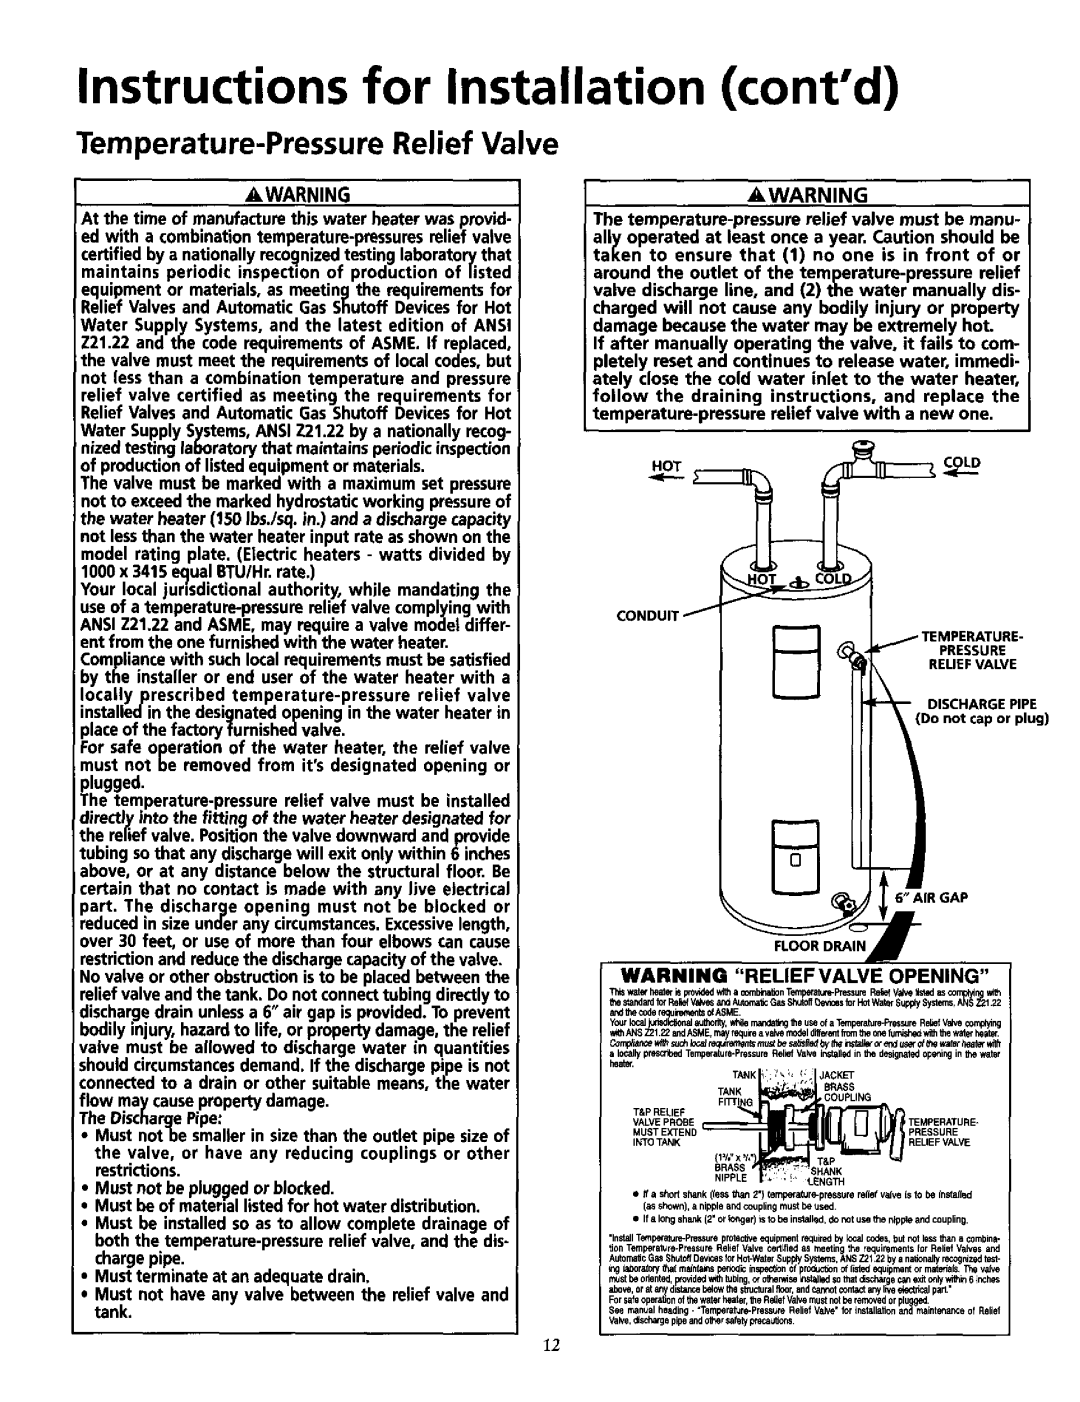 Maytag HE2966T, HE3940T, HE3940L, HE3950T, HE3940S manual Instructions for Installation contd, Temperature-PressureRelief Valve 